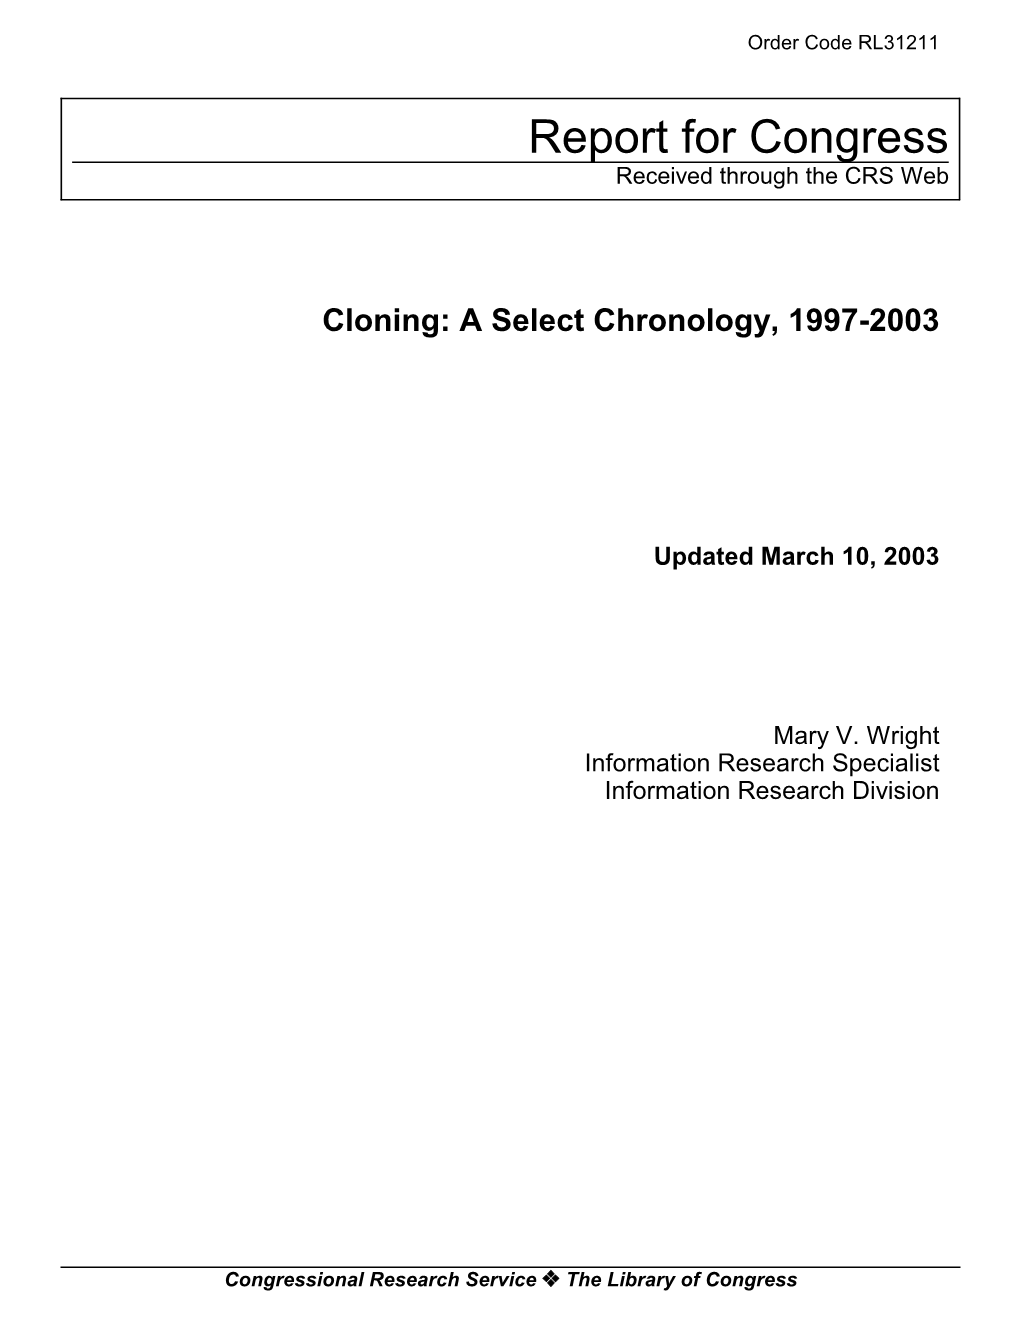 Cloning: a Select Chronology, 1997-2003